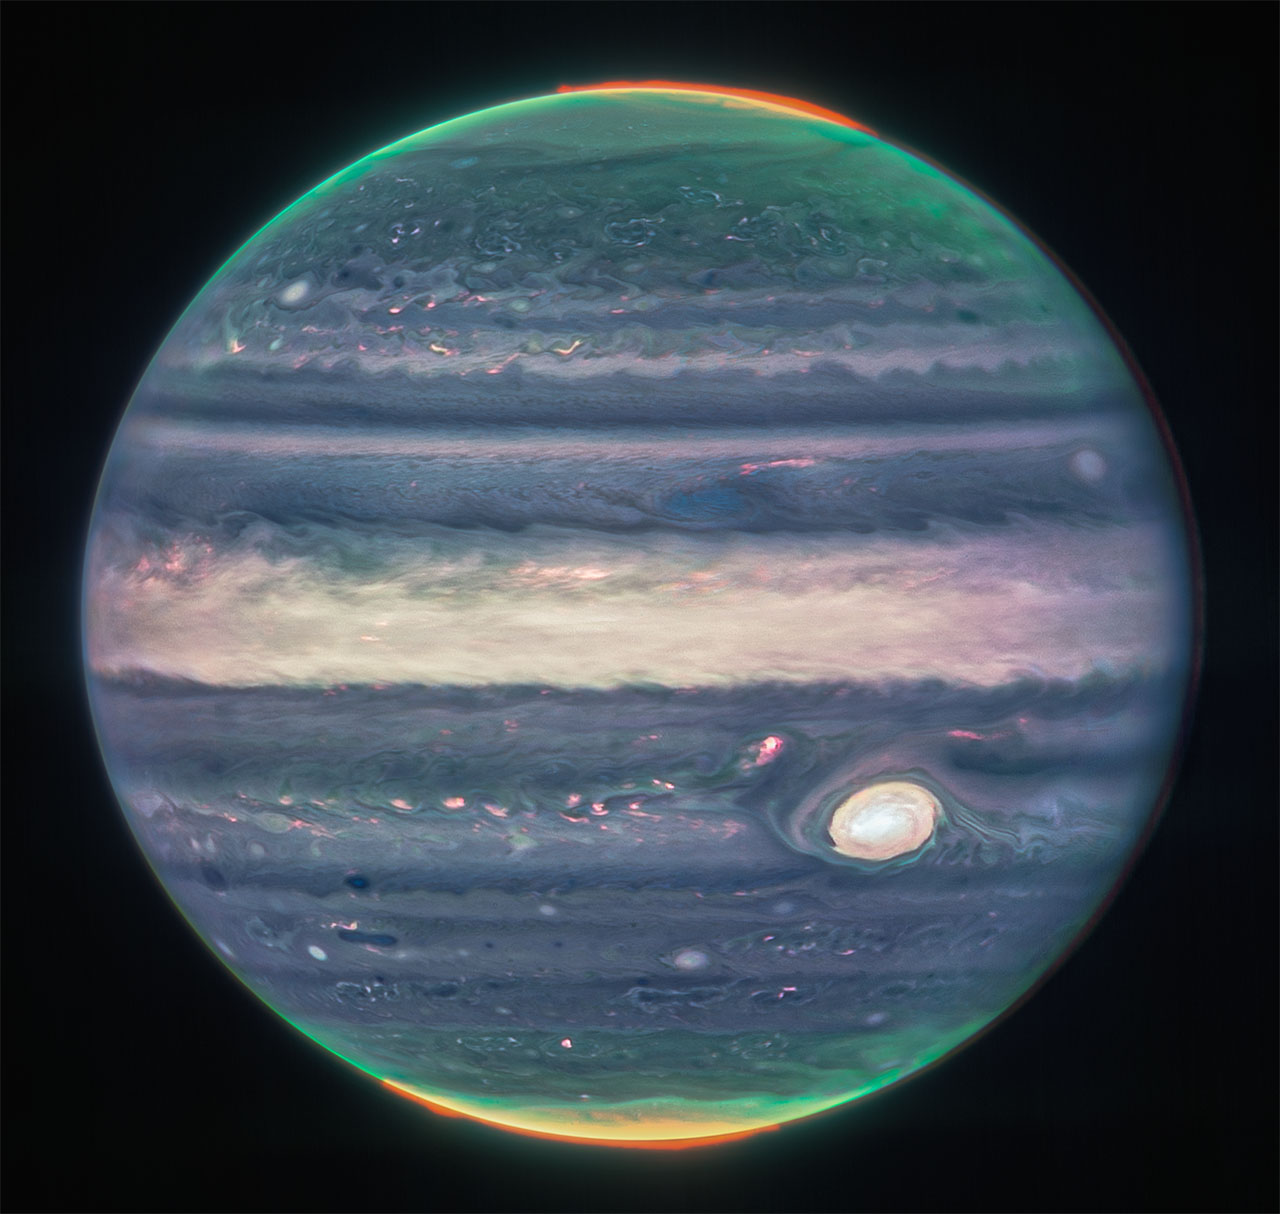 Unexpected details leap out in sharp new James Webb Space Telescope images  of Jupiter - AURA Astronomy